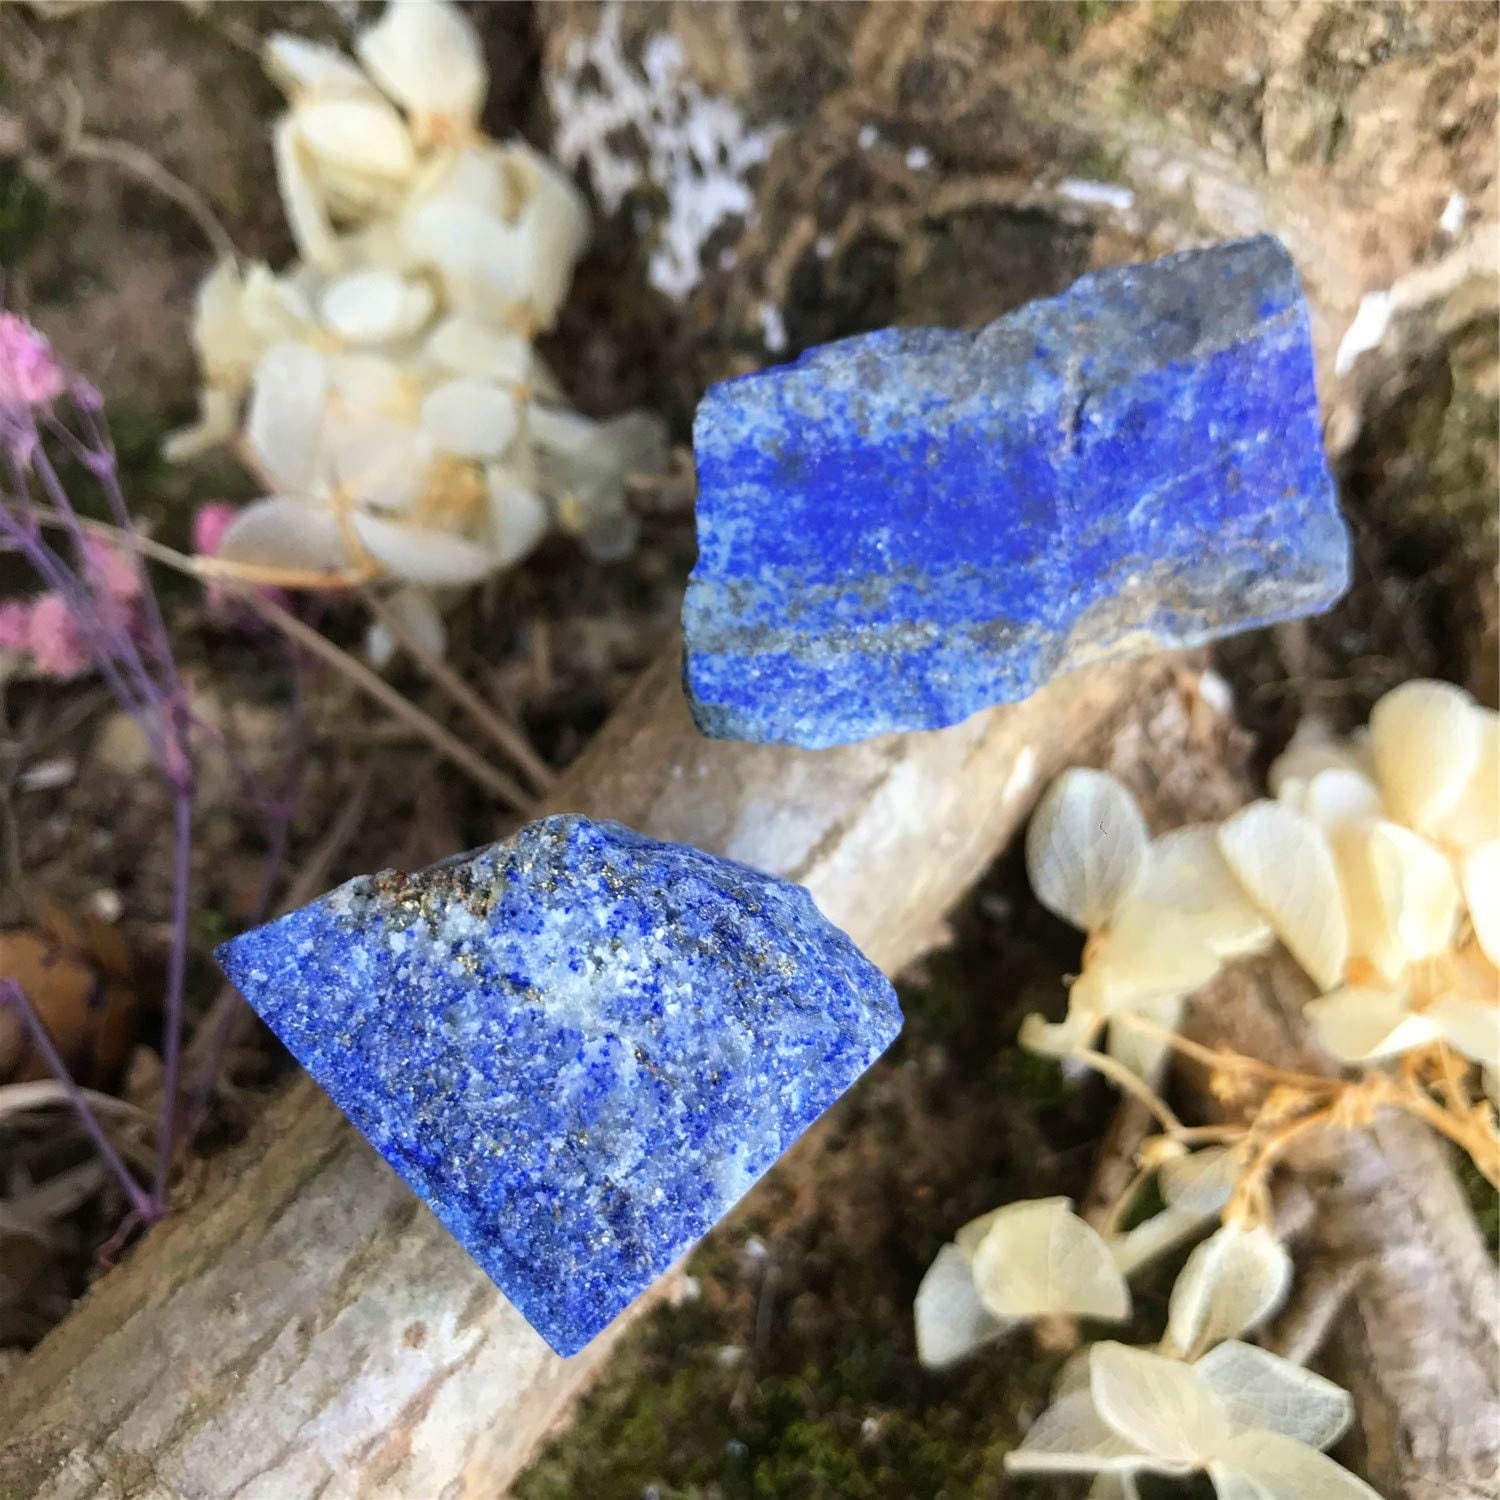 Zenkeeper 1Lb Lapis Lazuli Crystal Stone Natural Raw Stones & Fountain  Rocks for Tumbling, Cabbing, Polishing, Wire Wrapping, Wicca & Reiki  Crystal Healing 